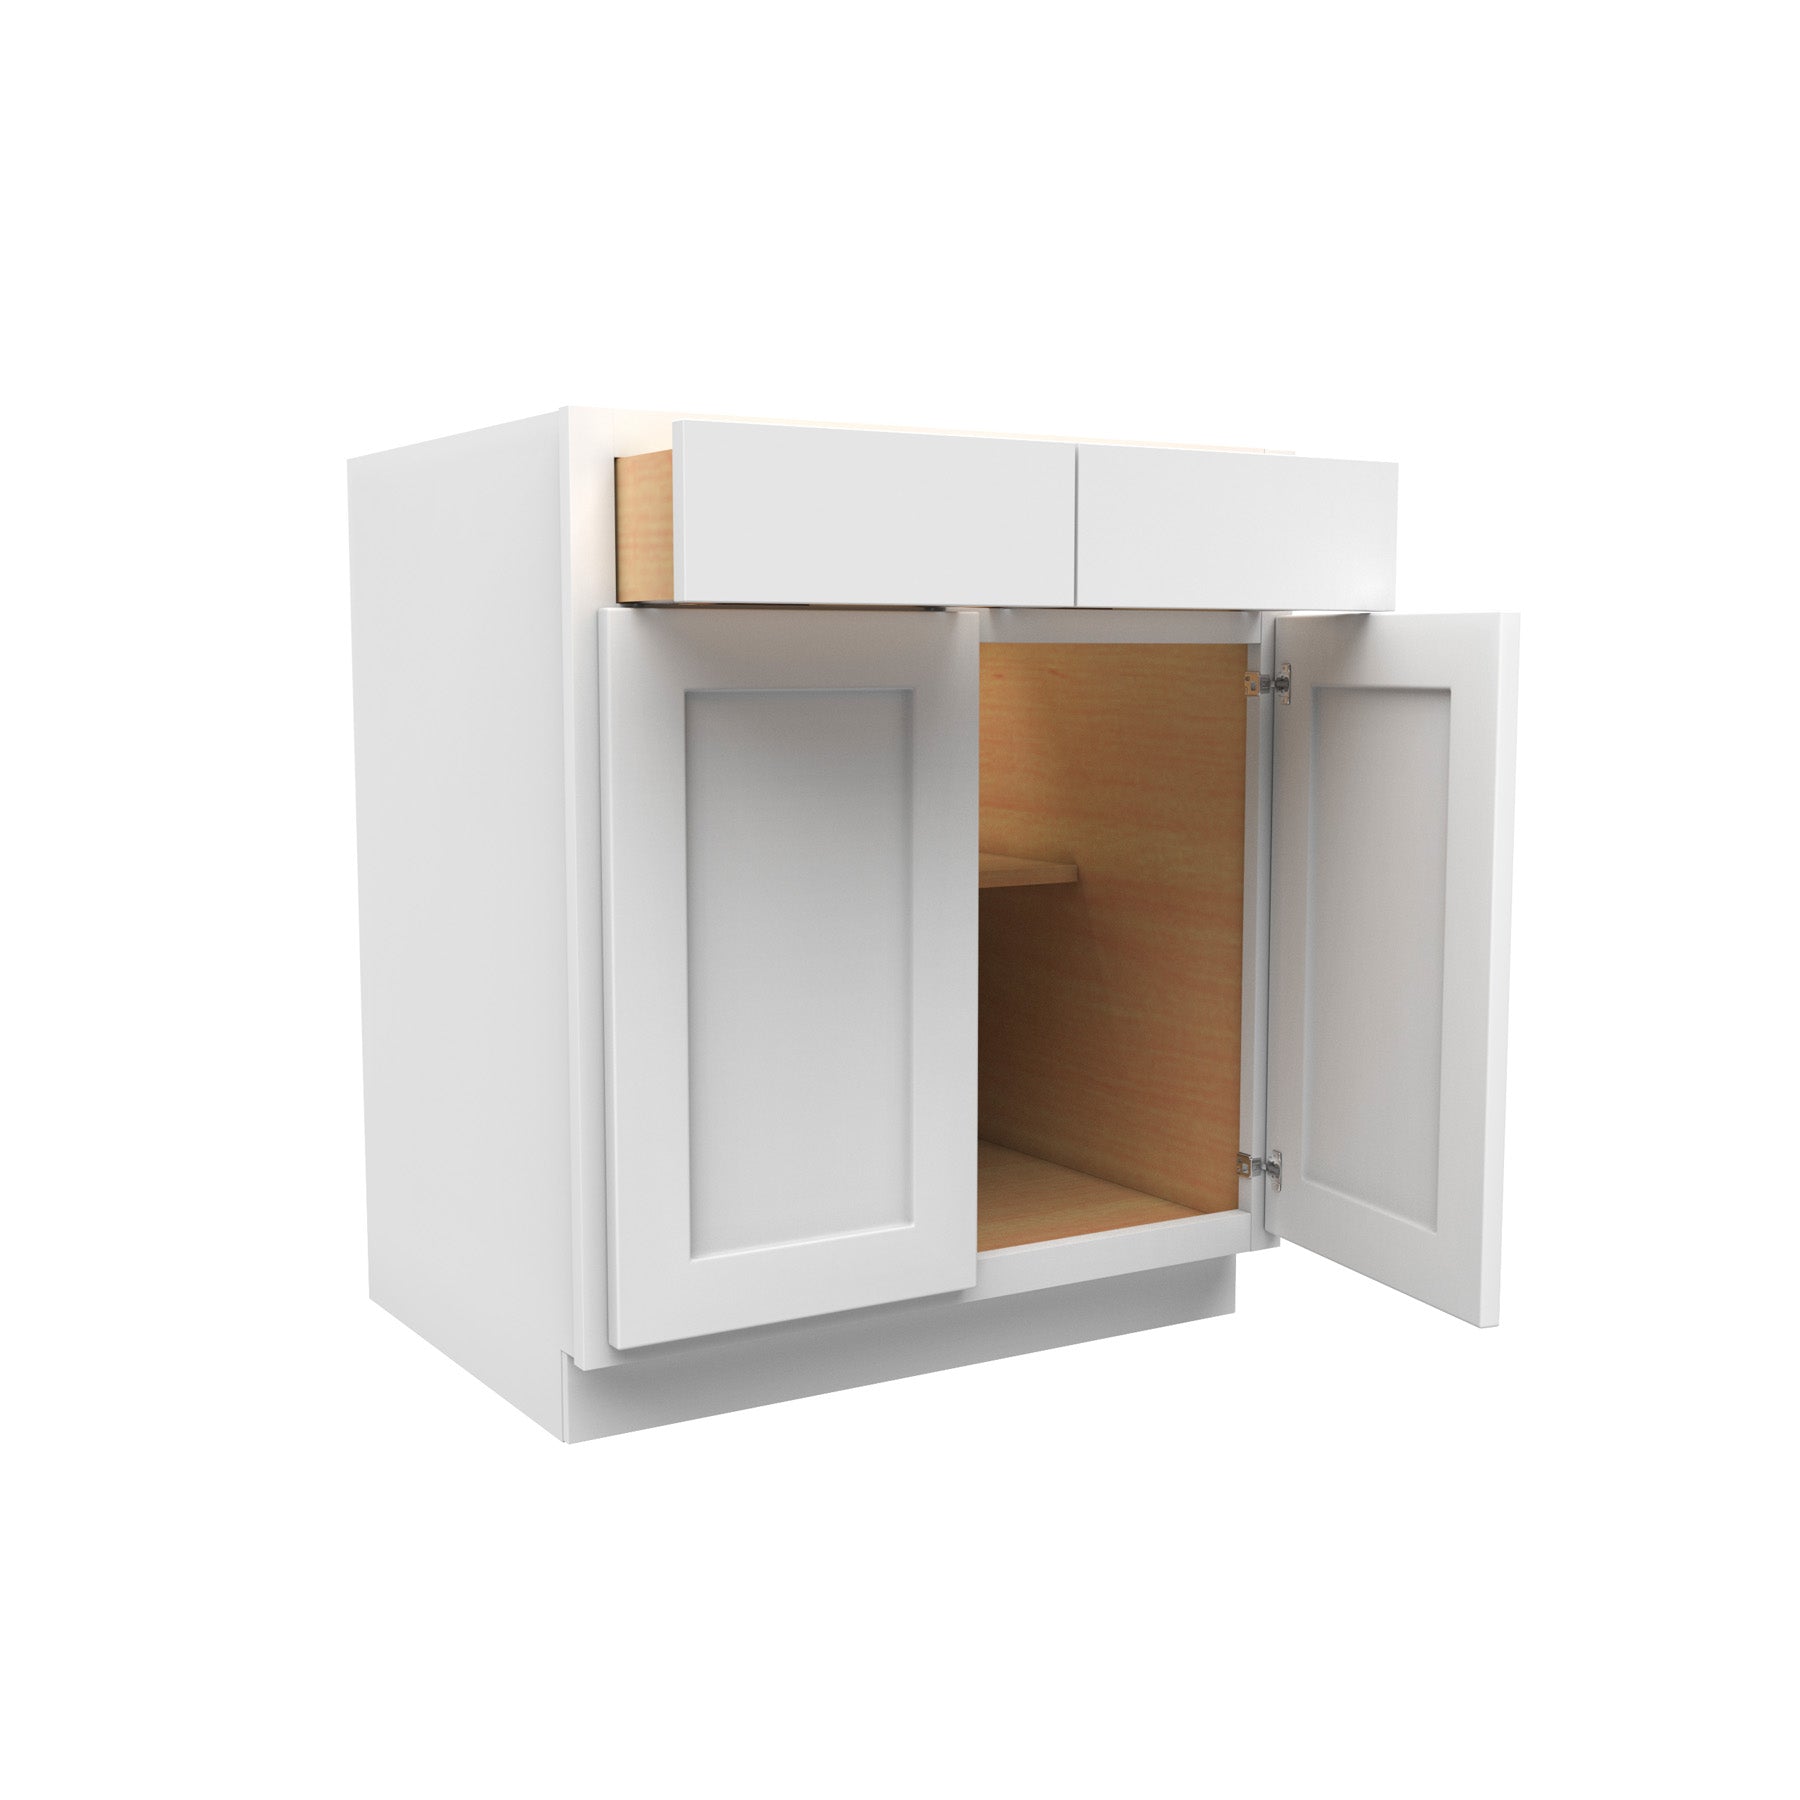 30 Inch Wide Double Door Base Cabinet - Luxor White Shaker - Ready To Assemble, 30"W x 34.5"H x 24"D